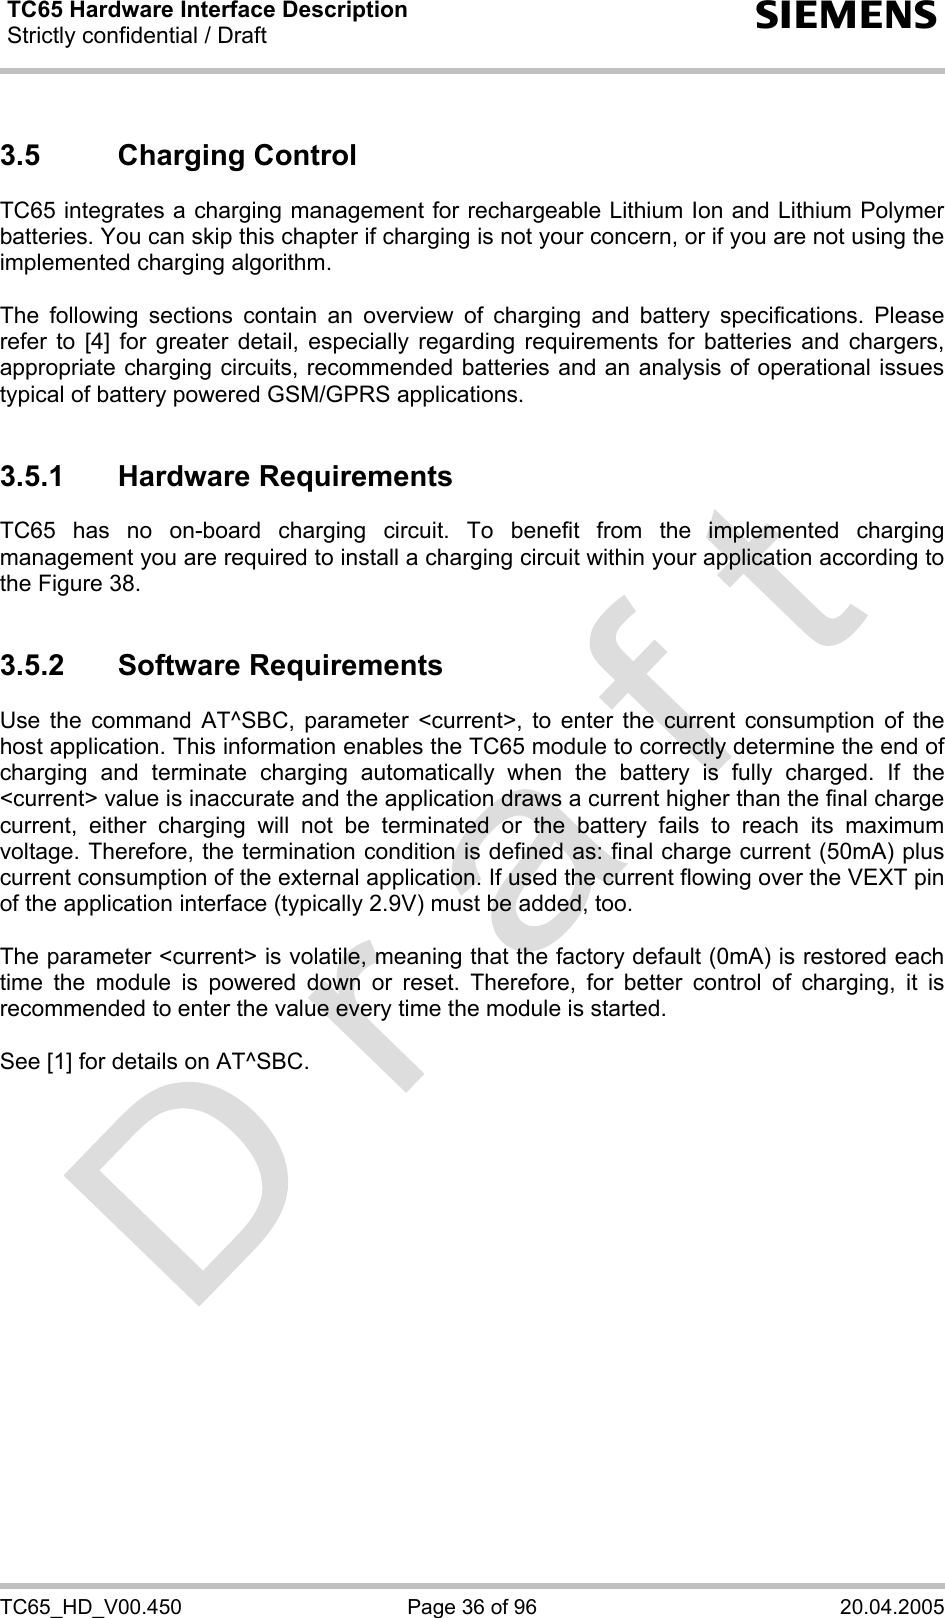 TC65 Hardware Interface Description Strictly confidential / Draft  s TC65_HD_V00.450  Page 36 of 96  20.04.2005 3.5 Charging Control TC65 integrates a charging management for rechargeable Lithium Ion and Lithium Polymer batteries. You can skip this chapter if charging is not your concern, or if you are not using the implemented charging algorithm.  The following sections contain an overview of charging and battery specifications. Please refer to [4] for greater detail, especially regarding requirements for batteries and chargers, appropriate charging circuits, recommended batteries and an analysis of operational issues typical of battery powered GSM/GPRS applications.  3.5.1 Hardware Requirements TC65 has no on-board charging circuit. To benefit from the implemented charging management you are required to install a charging circuit within your application according to the Figure 38.   3.5.2 Software Requirements Use the command AT^SBC, parameter &lt;current&gt;, to enter the current consumption of the host application. This information enables the TC65 module to correctly determine the end of charging and terminate charging automatically when the battery is fully charged. If the &lt;current&gt; value is inaccurate and the application draws a current higher than the final charge current, either charging will not be terminated or the battery fails to reach its maximum voltage. Therefore, the termination condition is defined as: final charge current (50mA) plus current consumption of the external application. If used the current flowing over the VEXT pin of the application interface (typically 2.9V) must be added, too.   The parameter &lt;current&gt; is volatile, meaning that the factory default (0mA) is restored each time the module is powered down or reset. Therefore, for better control of charging, it is recommended to enter the value every time the module is started.  See [1] for details on AT^SBC.  